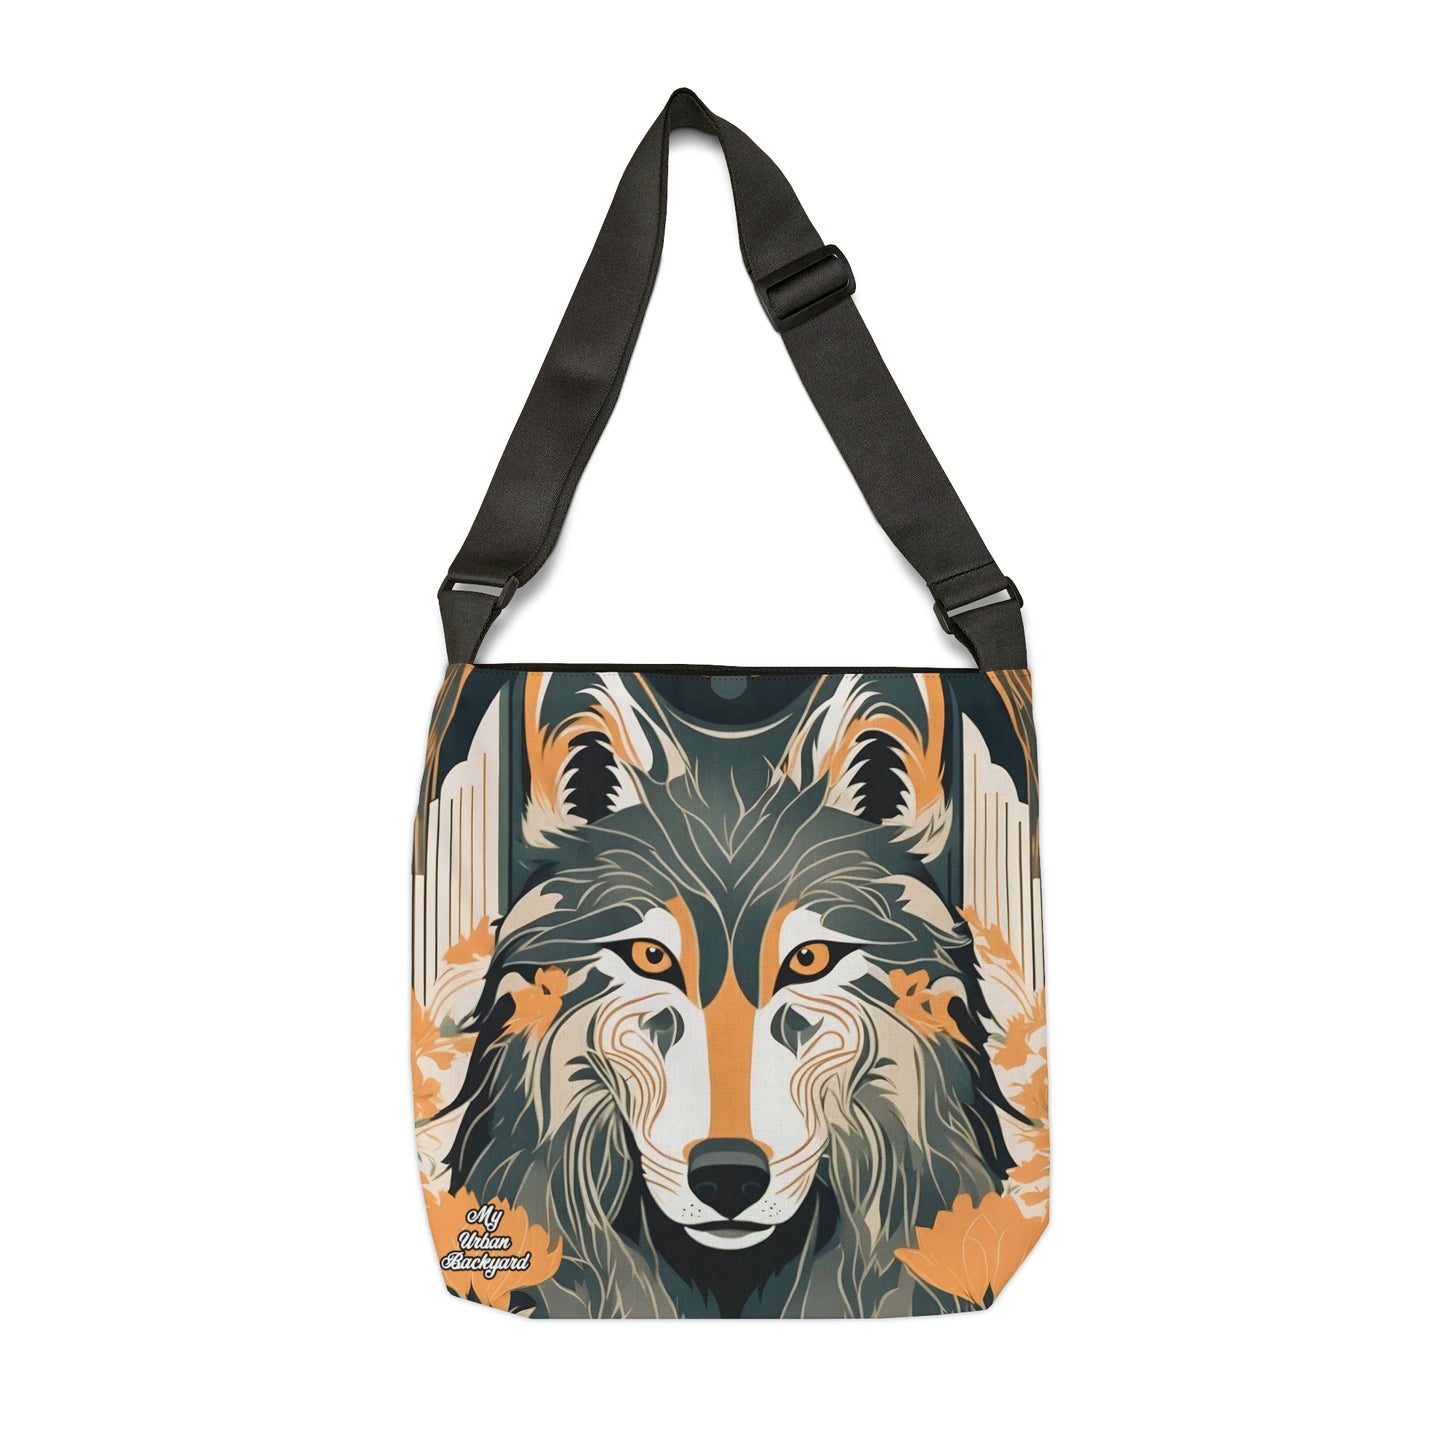 Art Deco Wolf, Tote Bag with Adjustable Strap - Trendy and Versatile